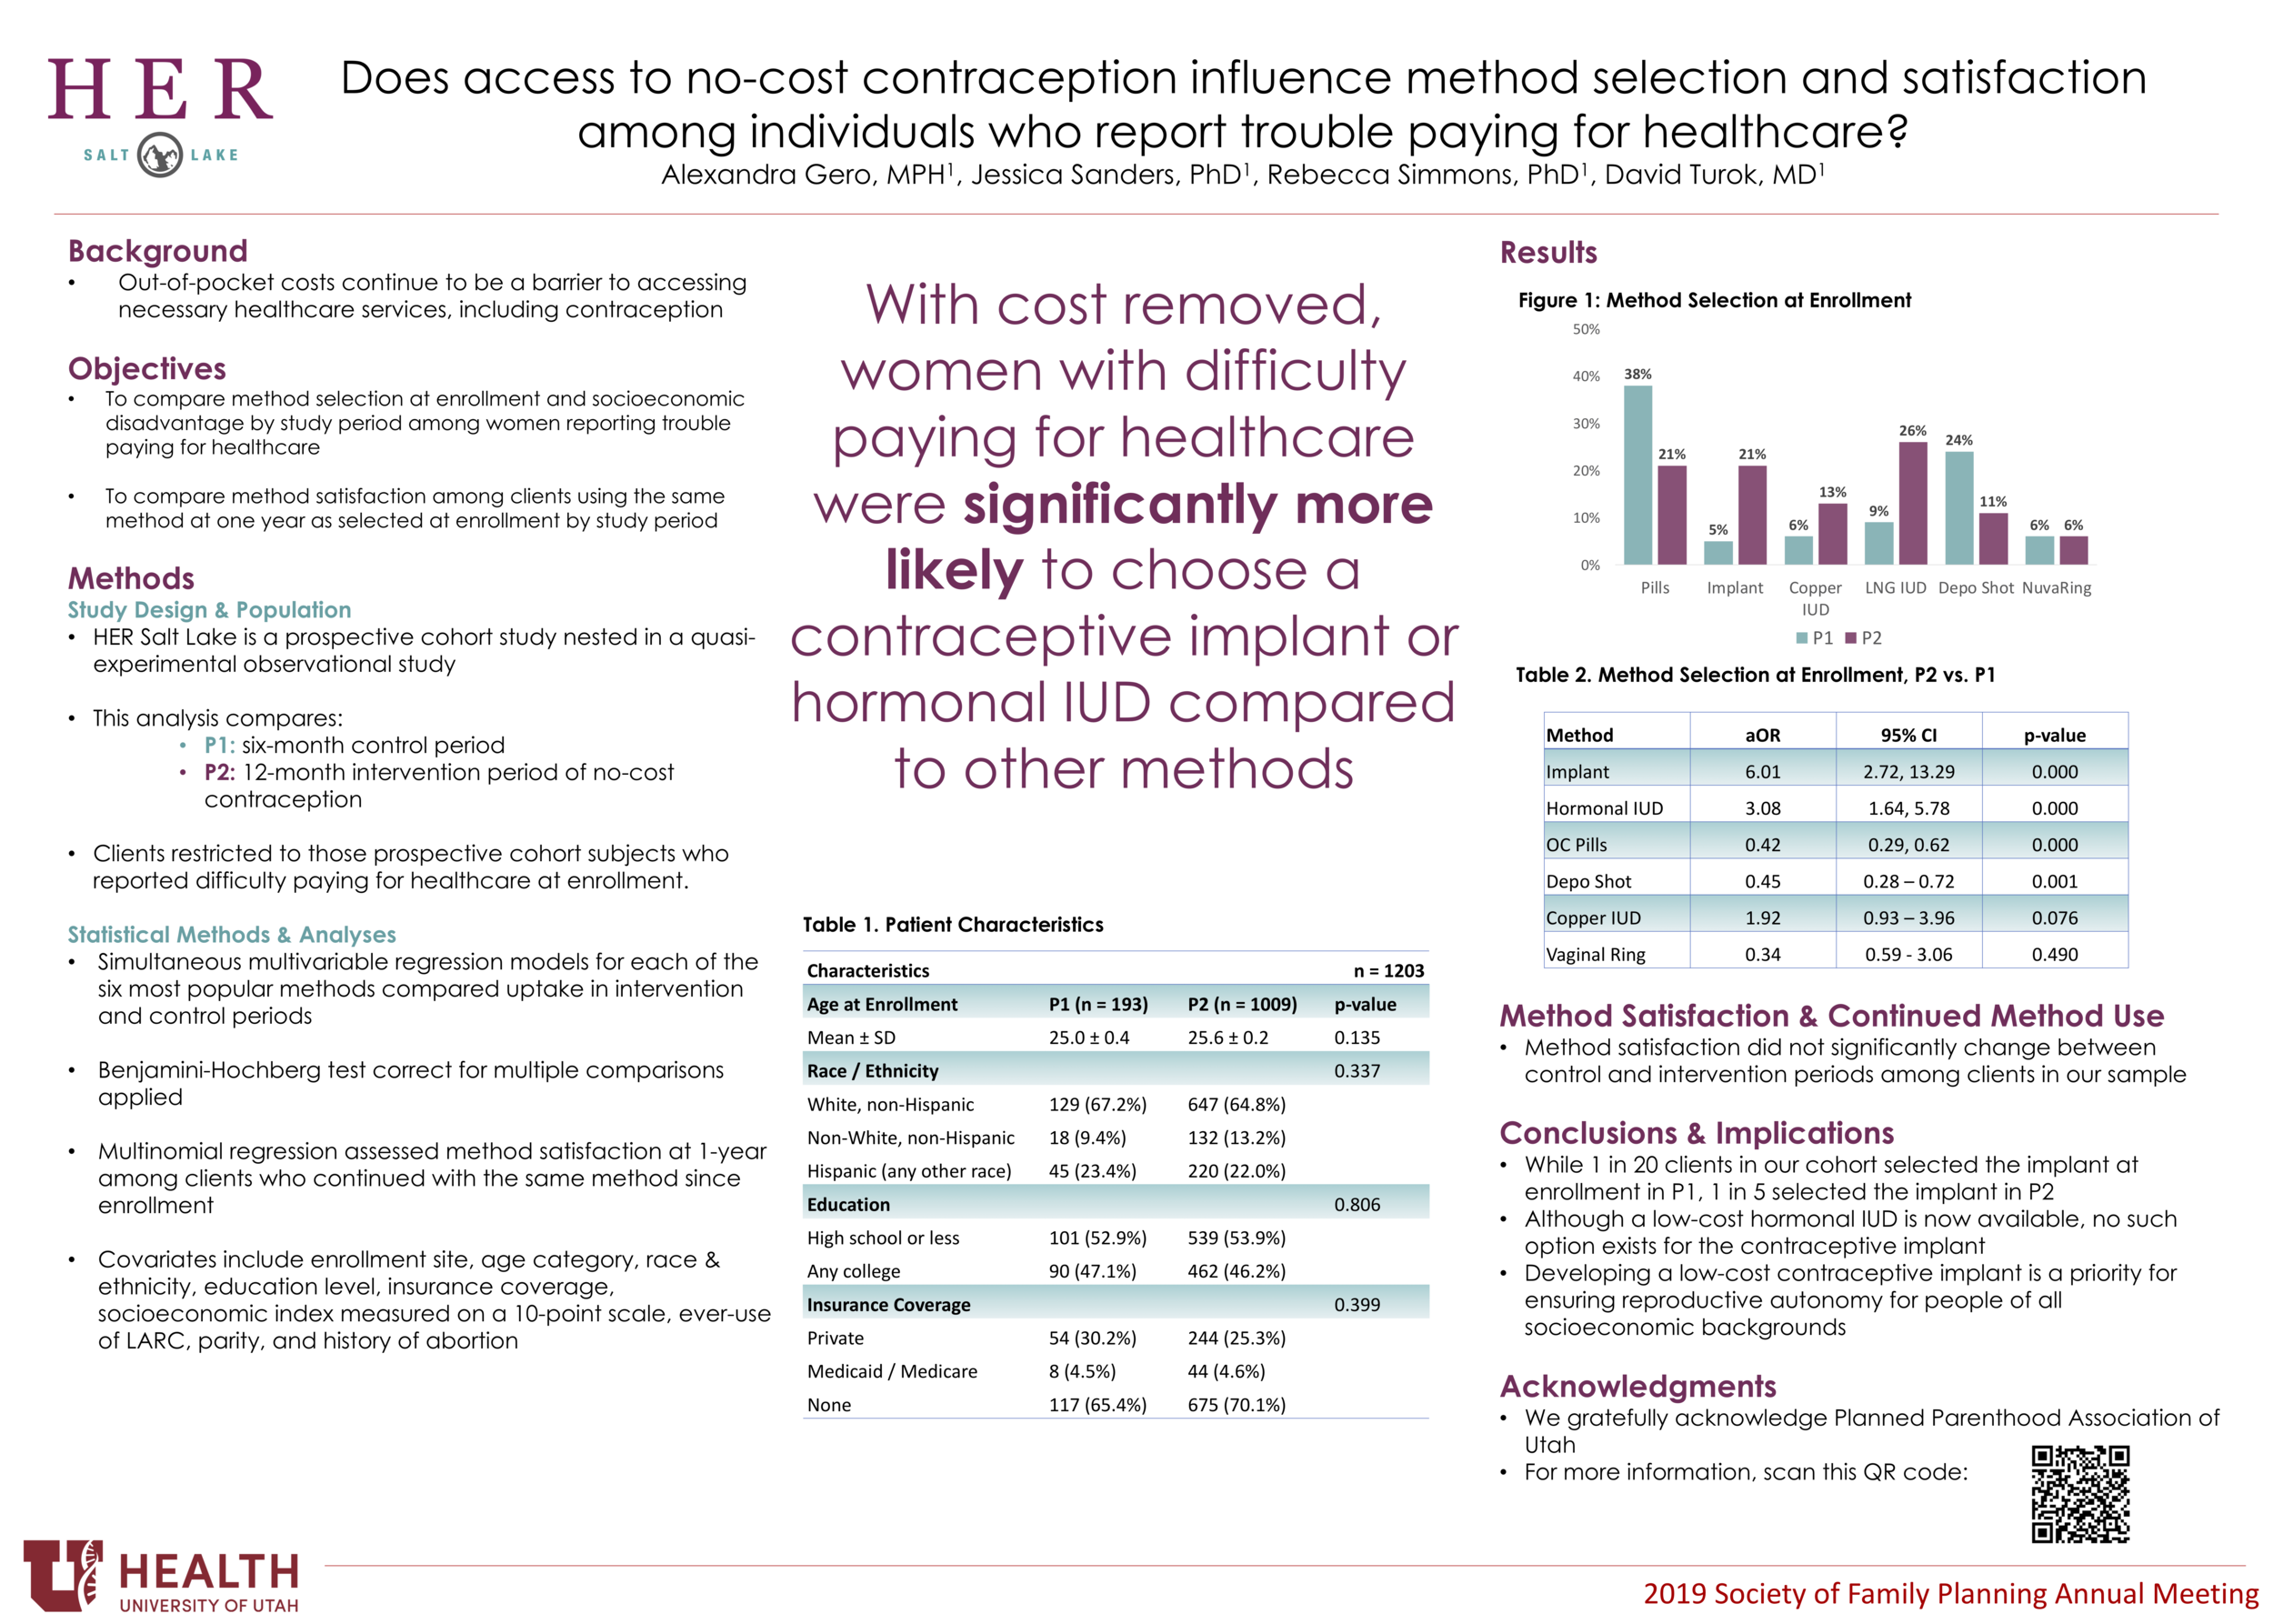 Does access to no-cost contraception influence method selection and satisfaction among individuals who report trouble paying for healthcare?